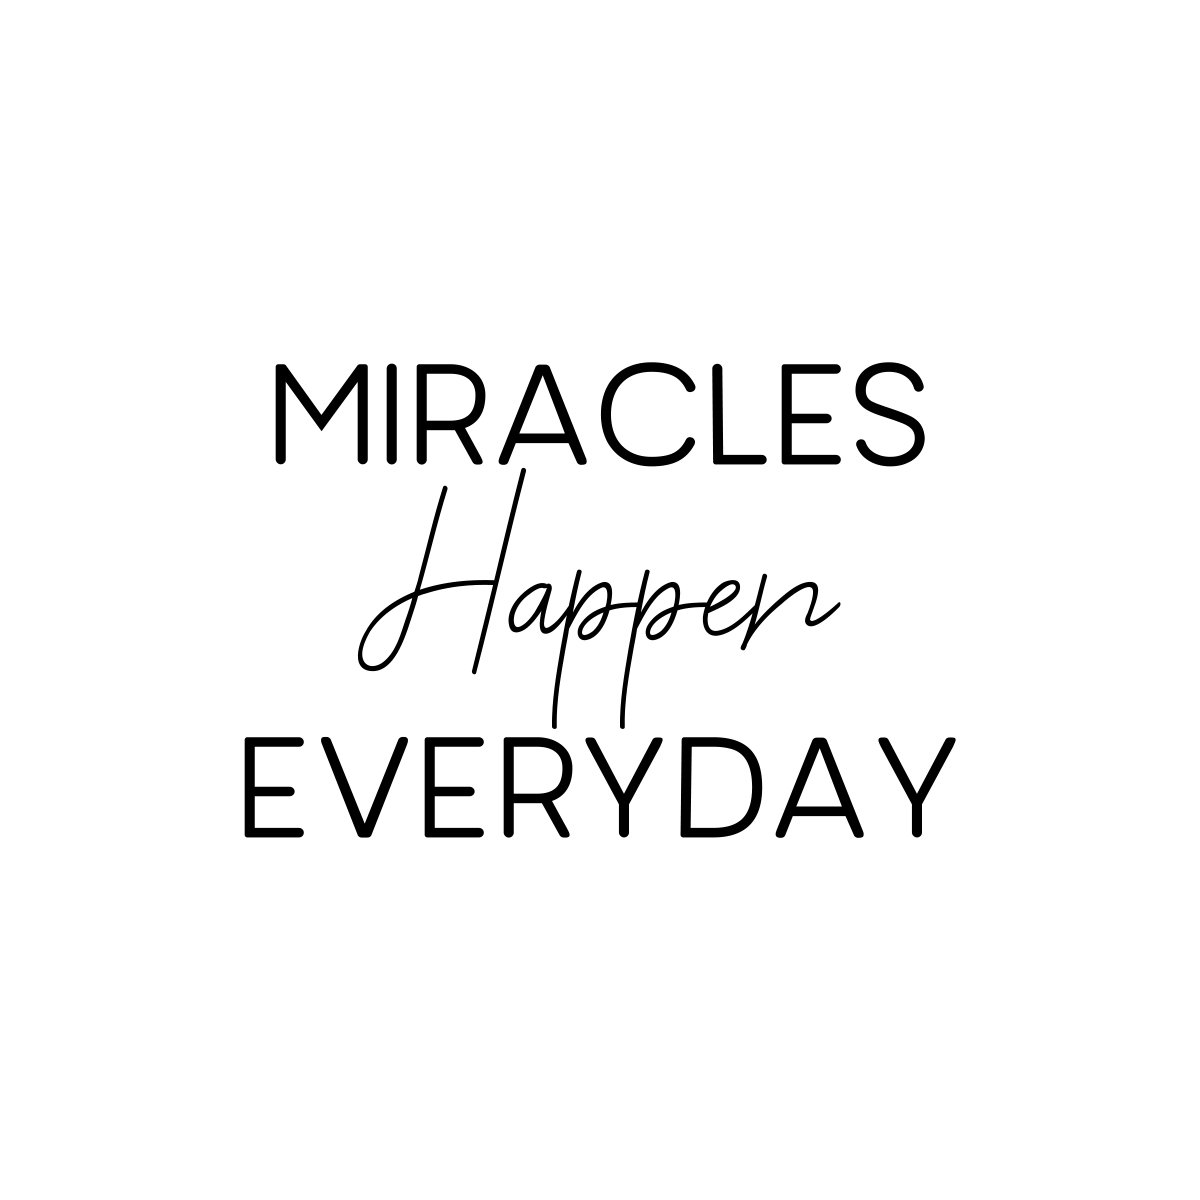 NAVEEN KANCHAN on X:  Miracles happen everyday  #miracles